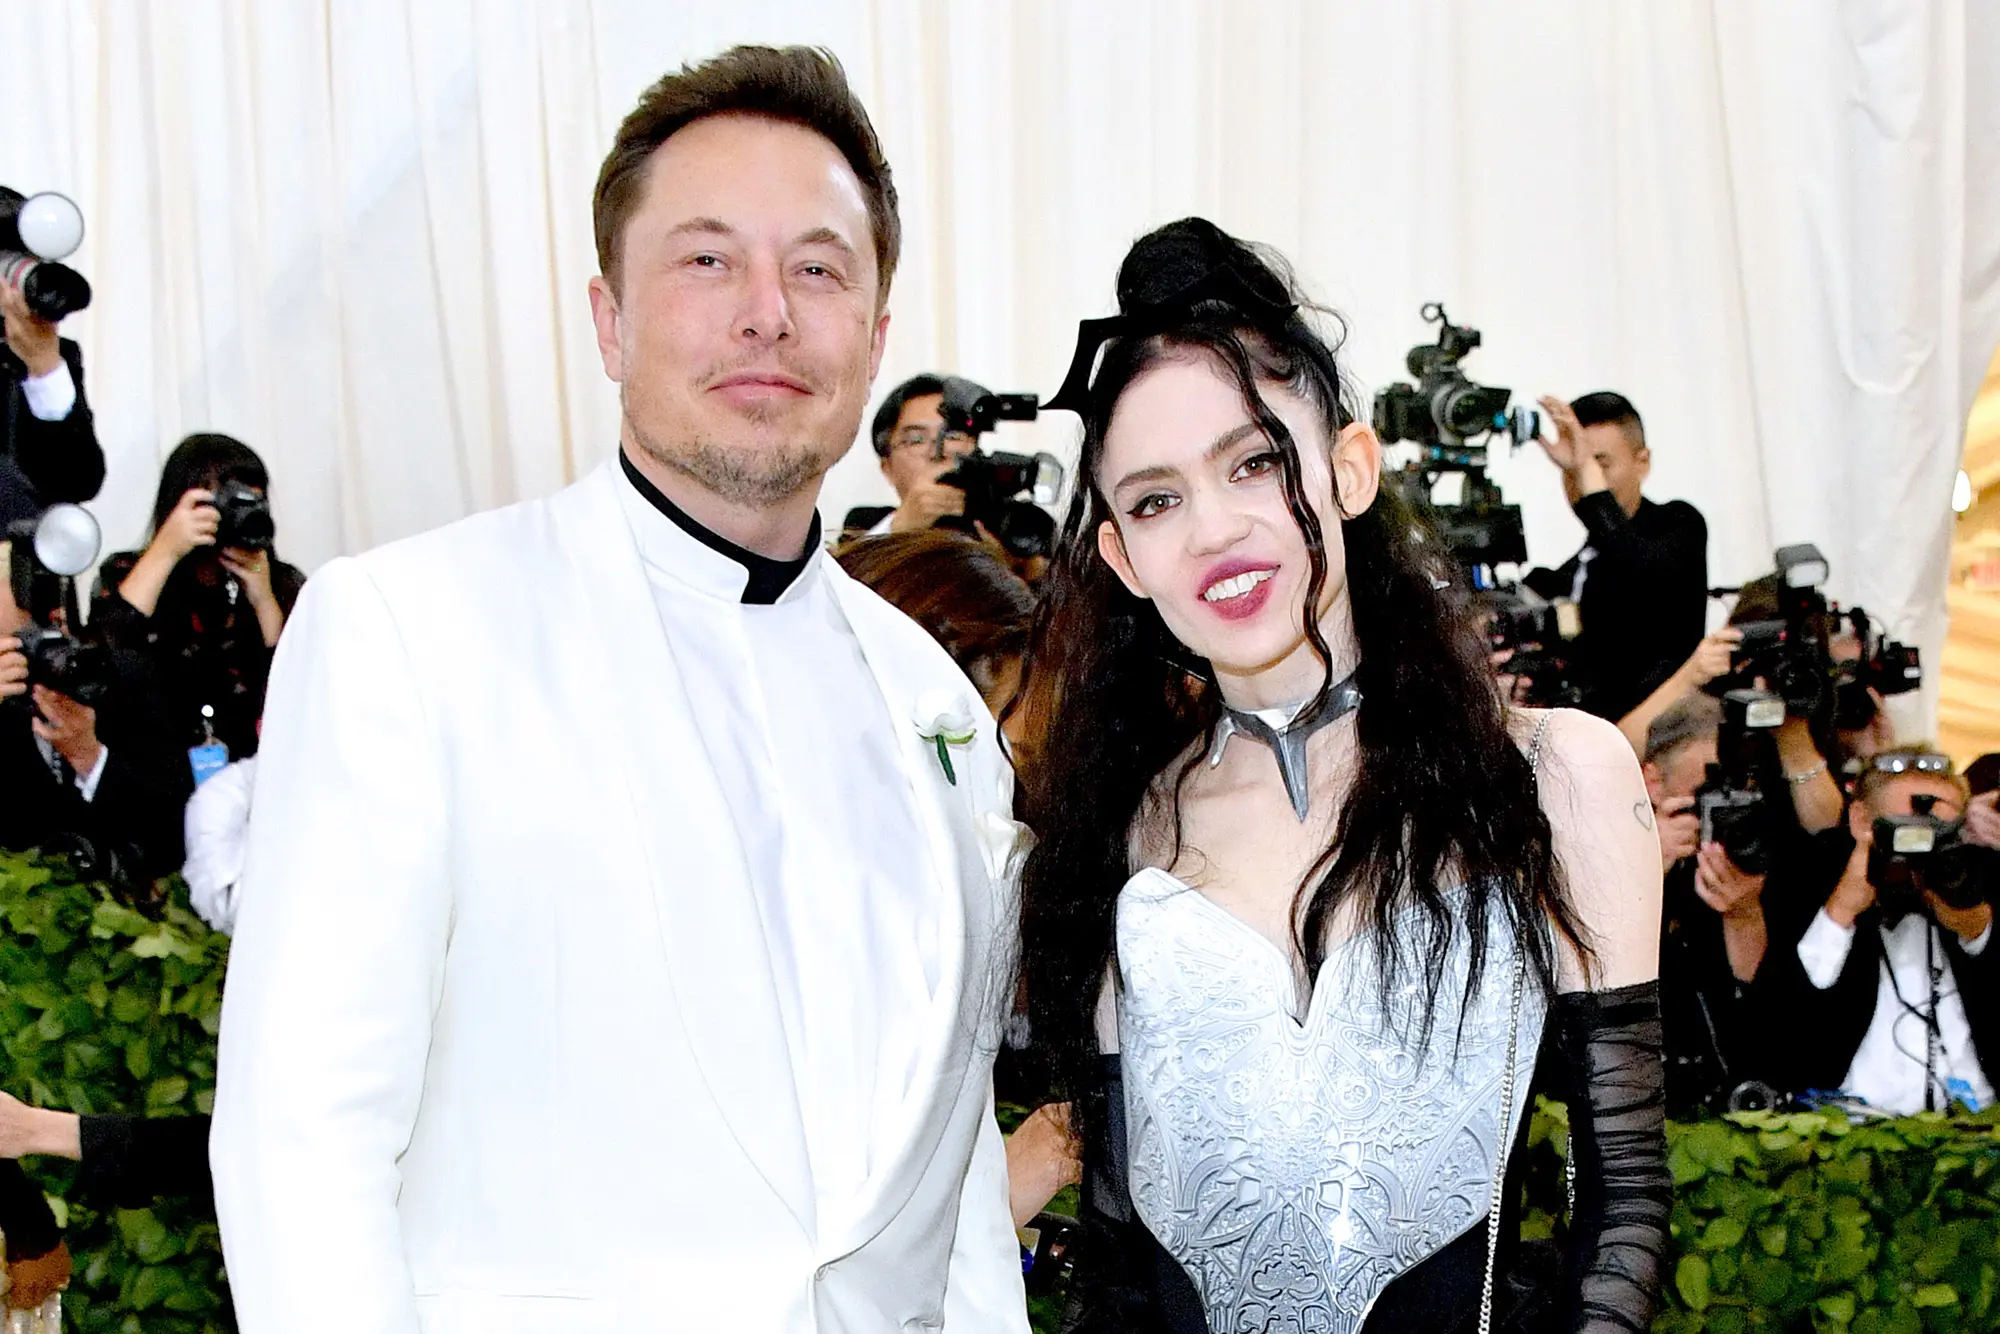 Elon Musk Spouse, Marriages, Children and Current Girlfriend